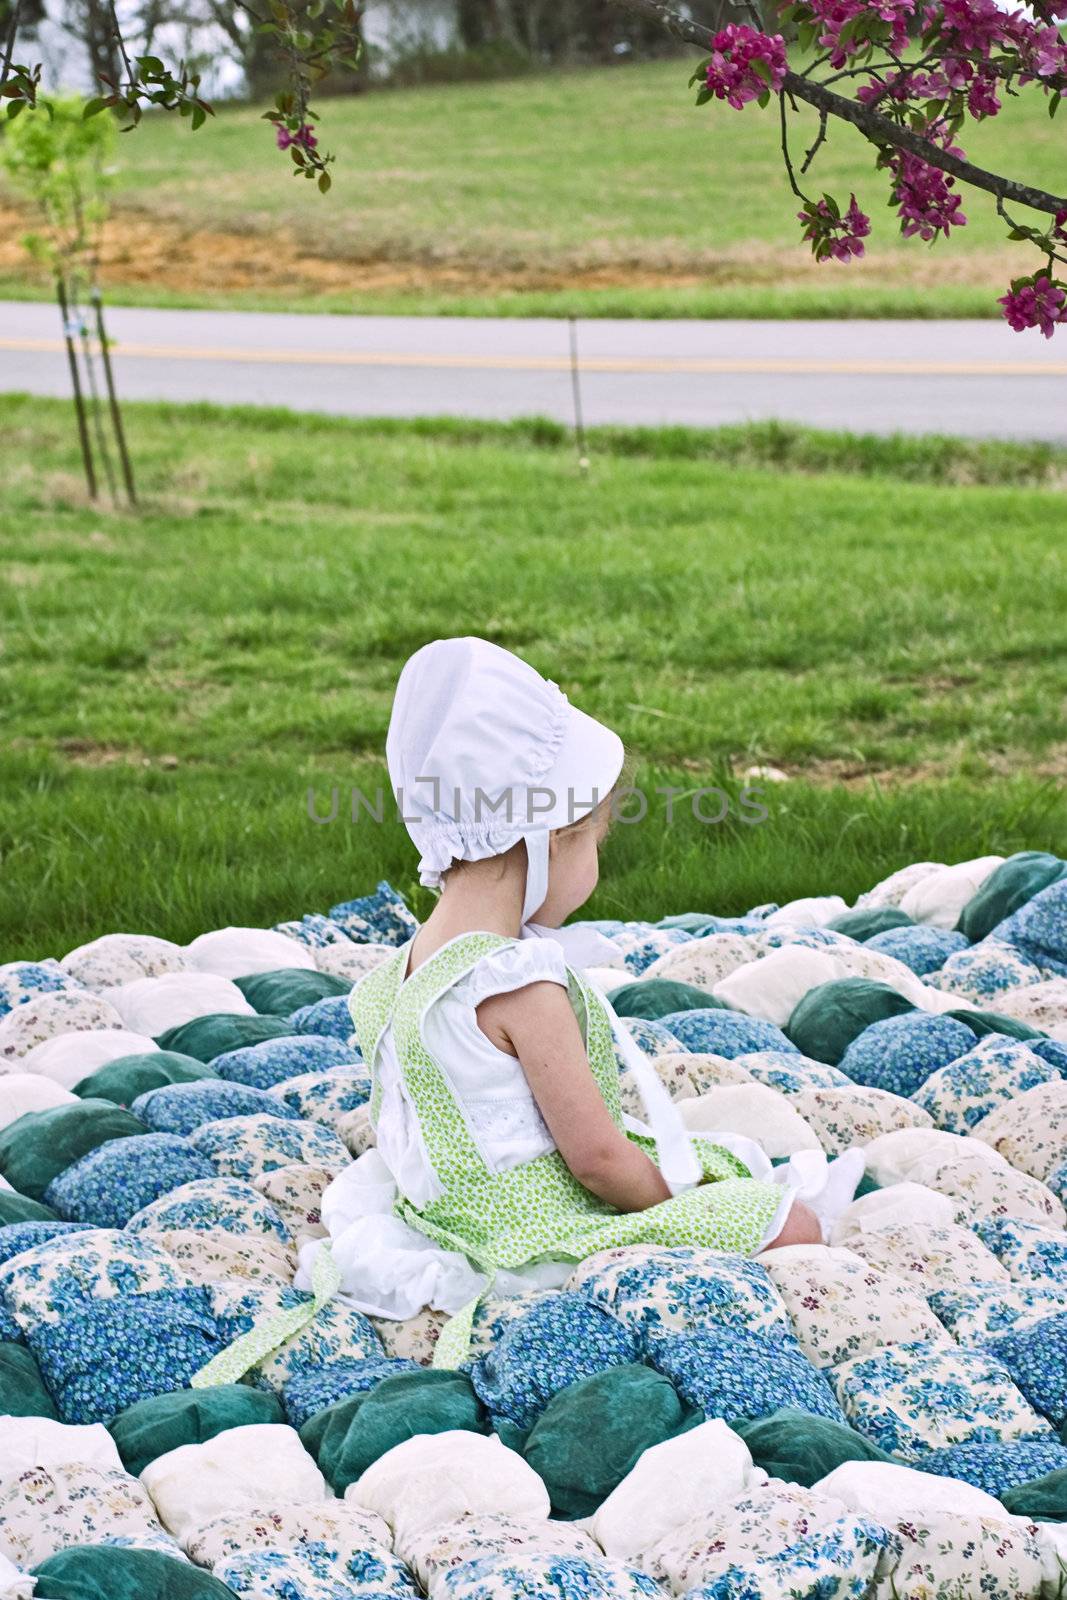 Amish child sitting on an old biscuit quilt.